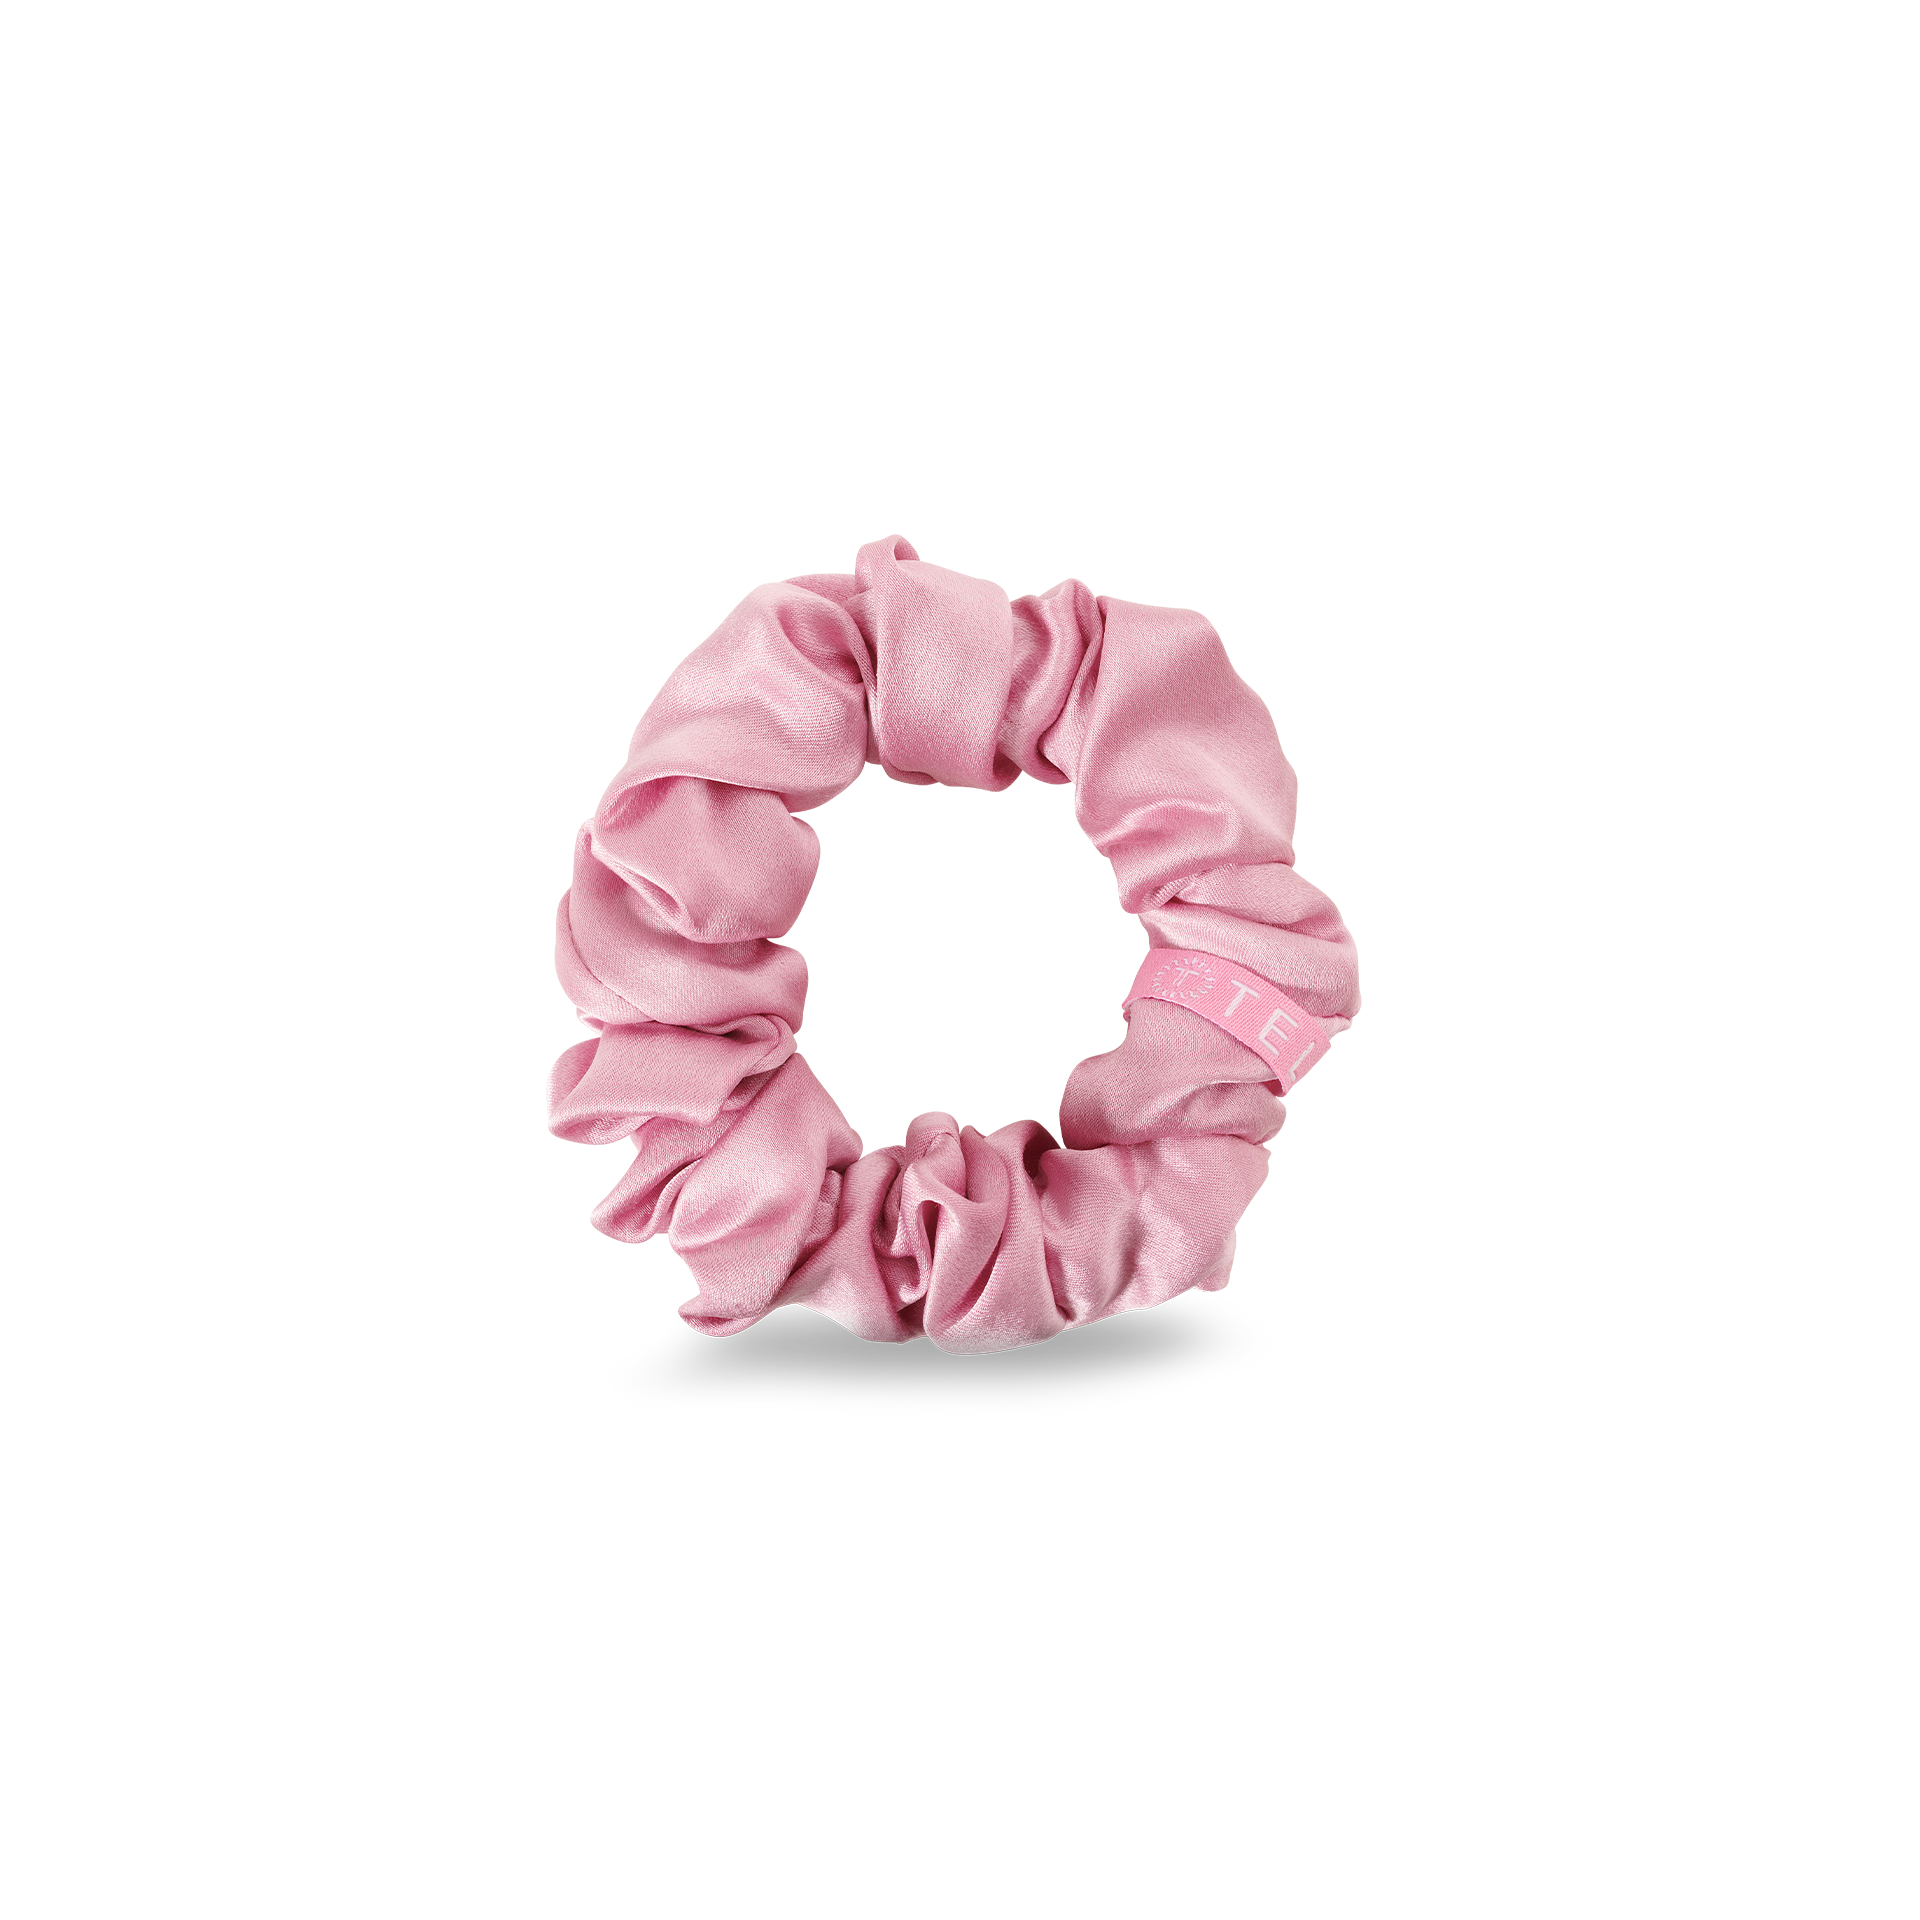 Teleties Silk Scrunchies - Large Band Pack of 3 - I Pink I Love You